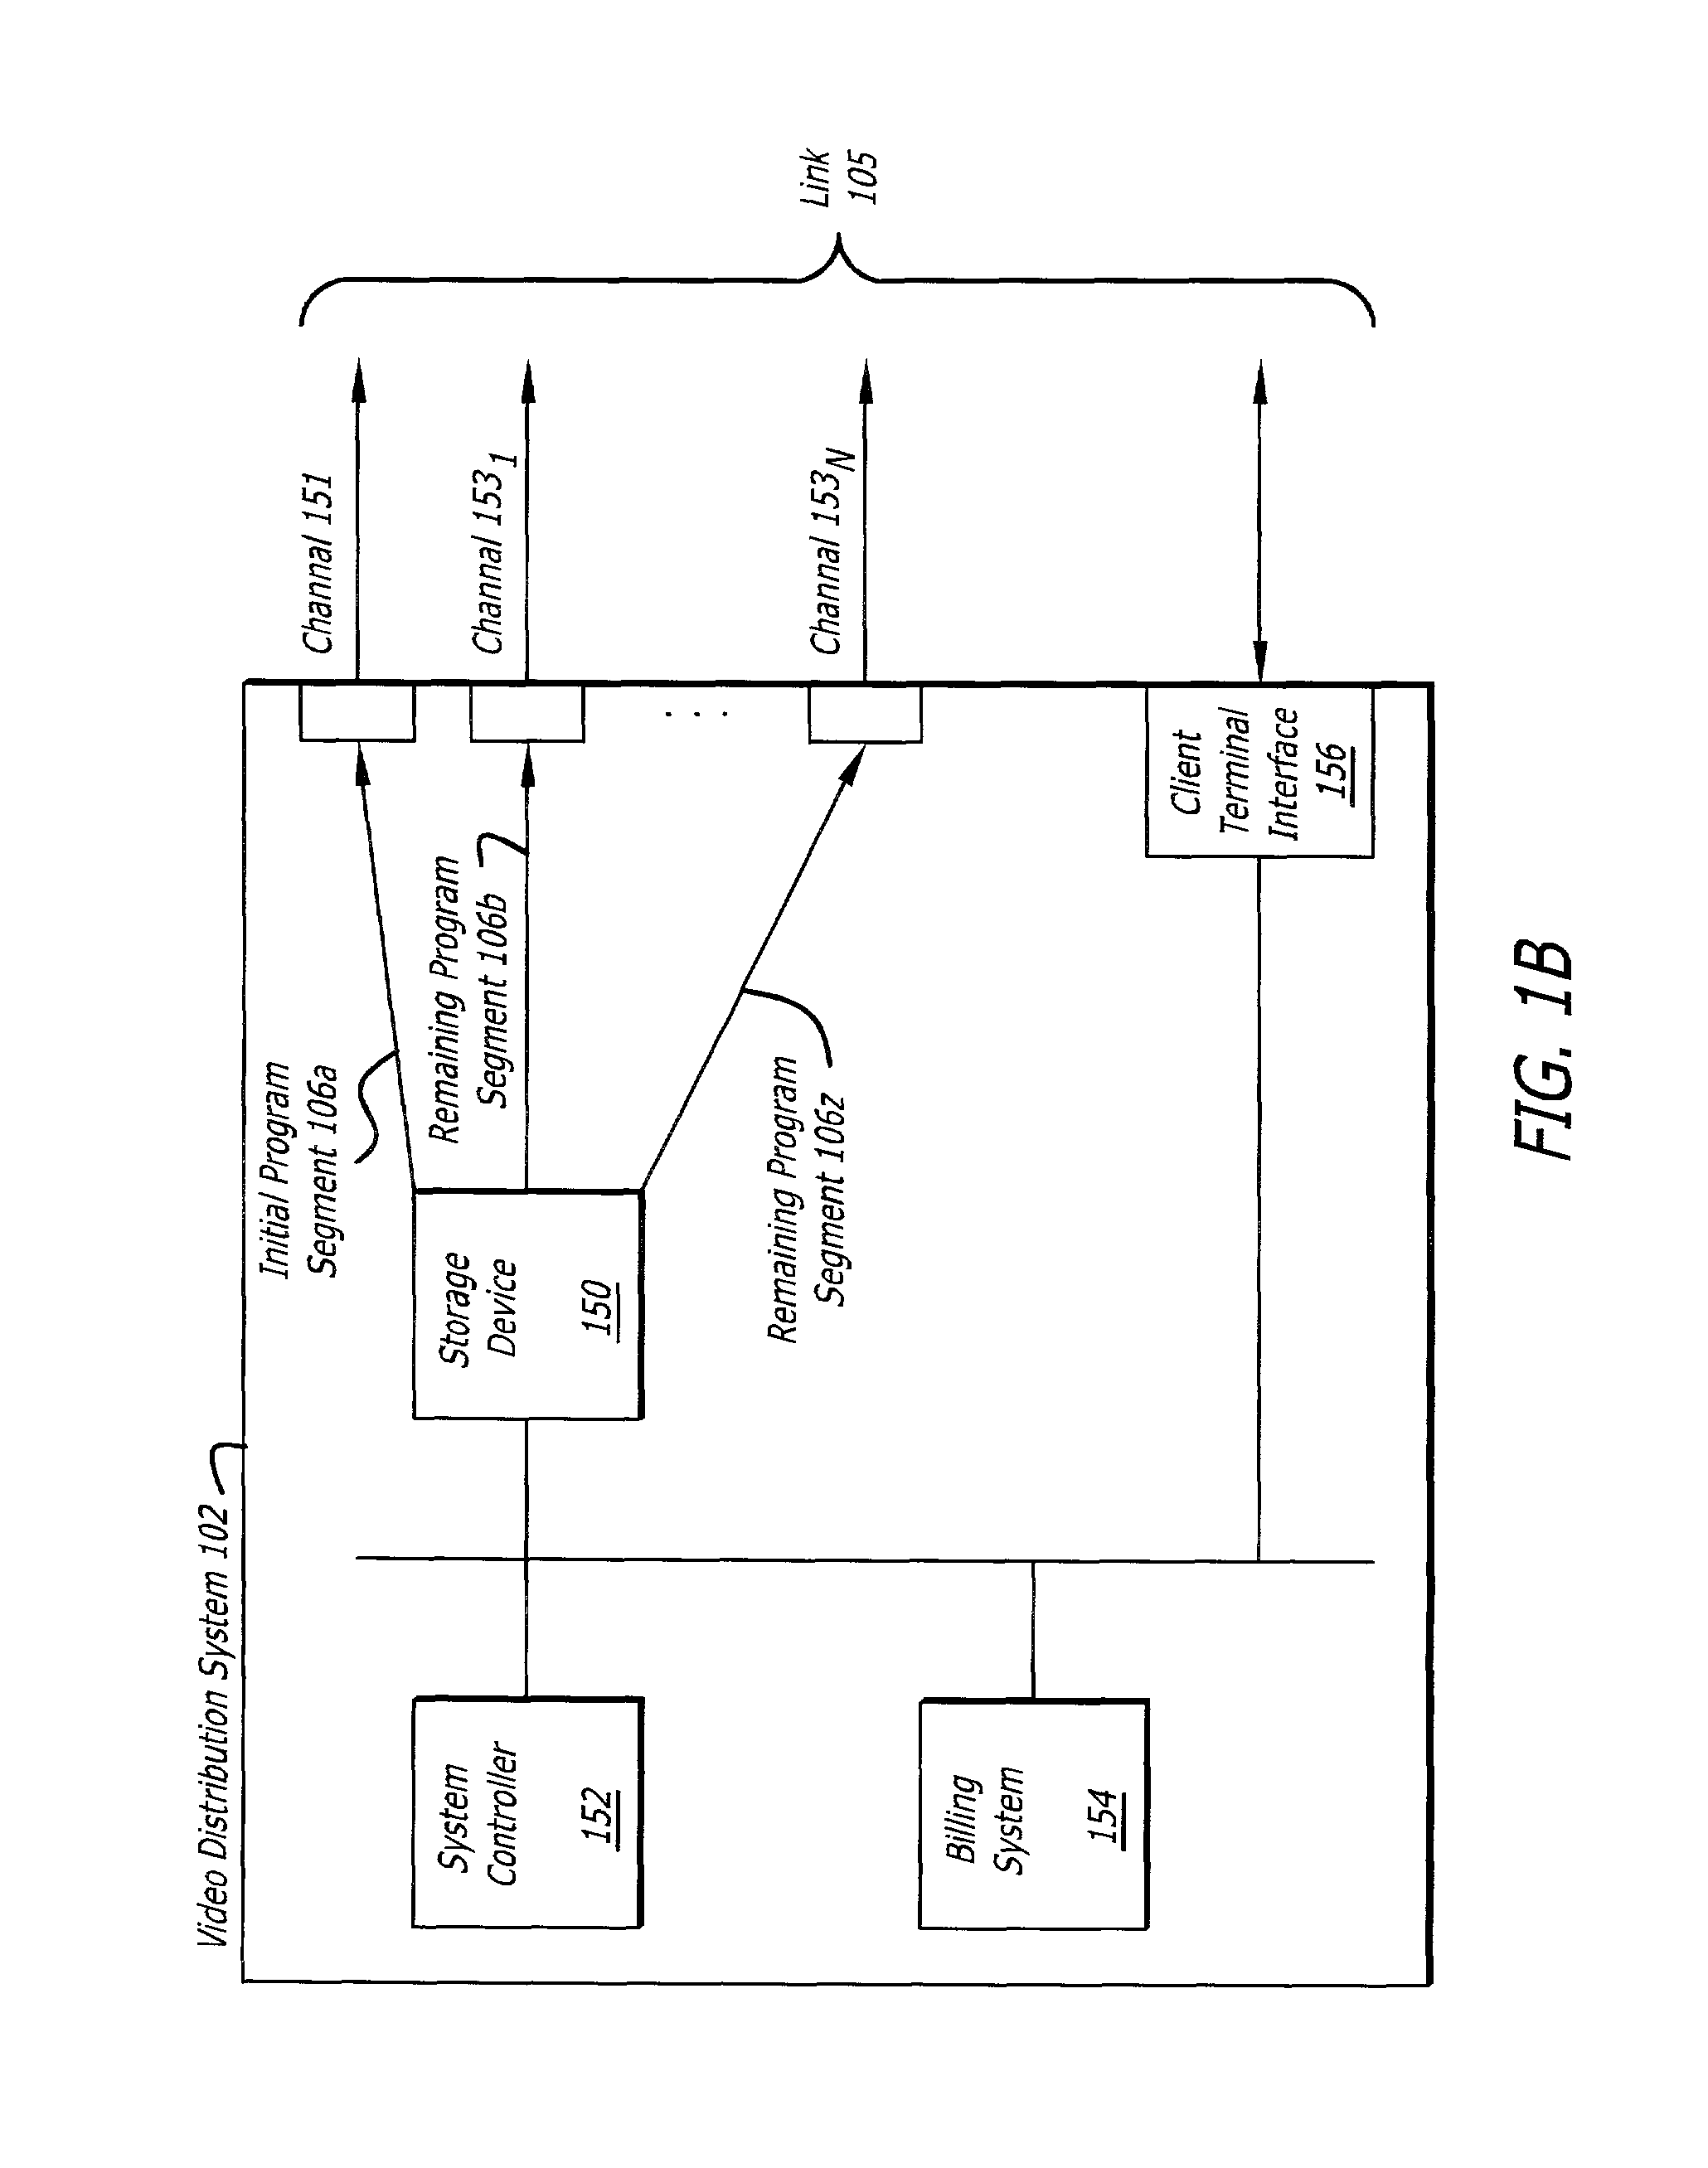 Client terminal for storing an initial program segment and appending a remaining program segment to provide a video program on demand